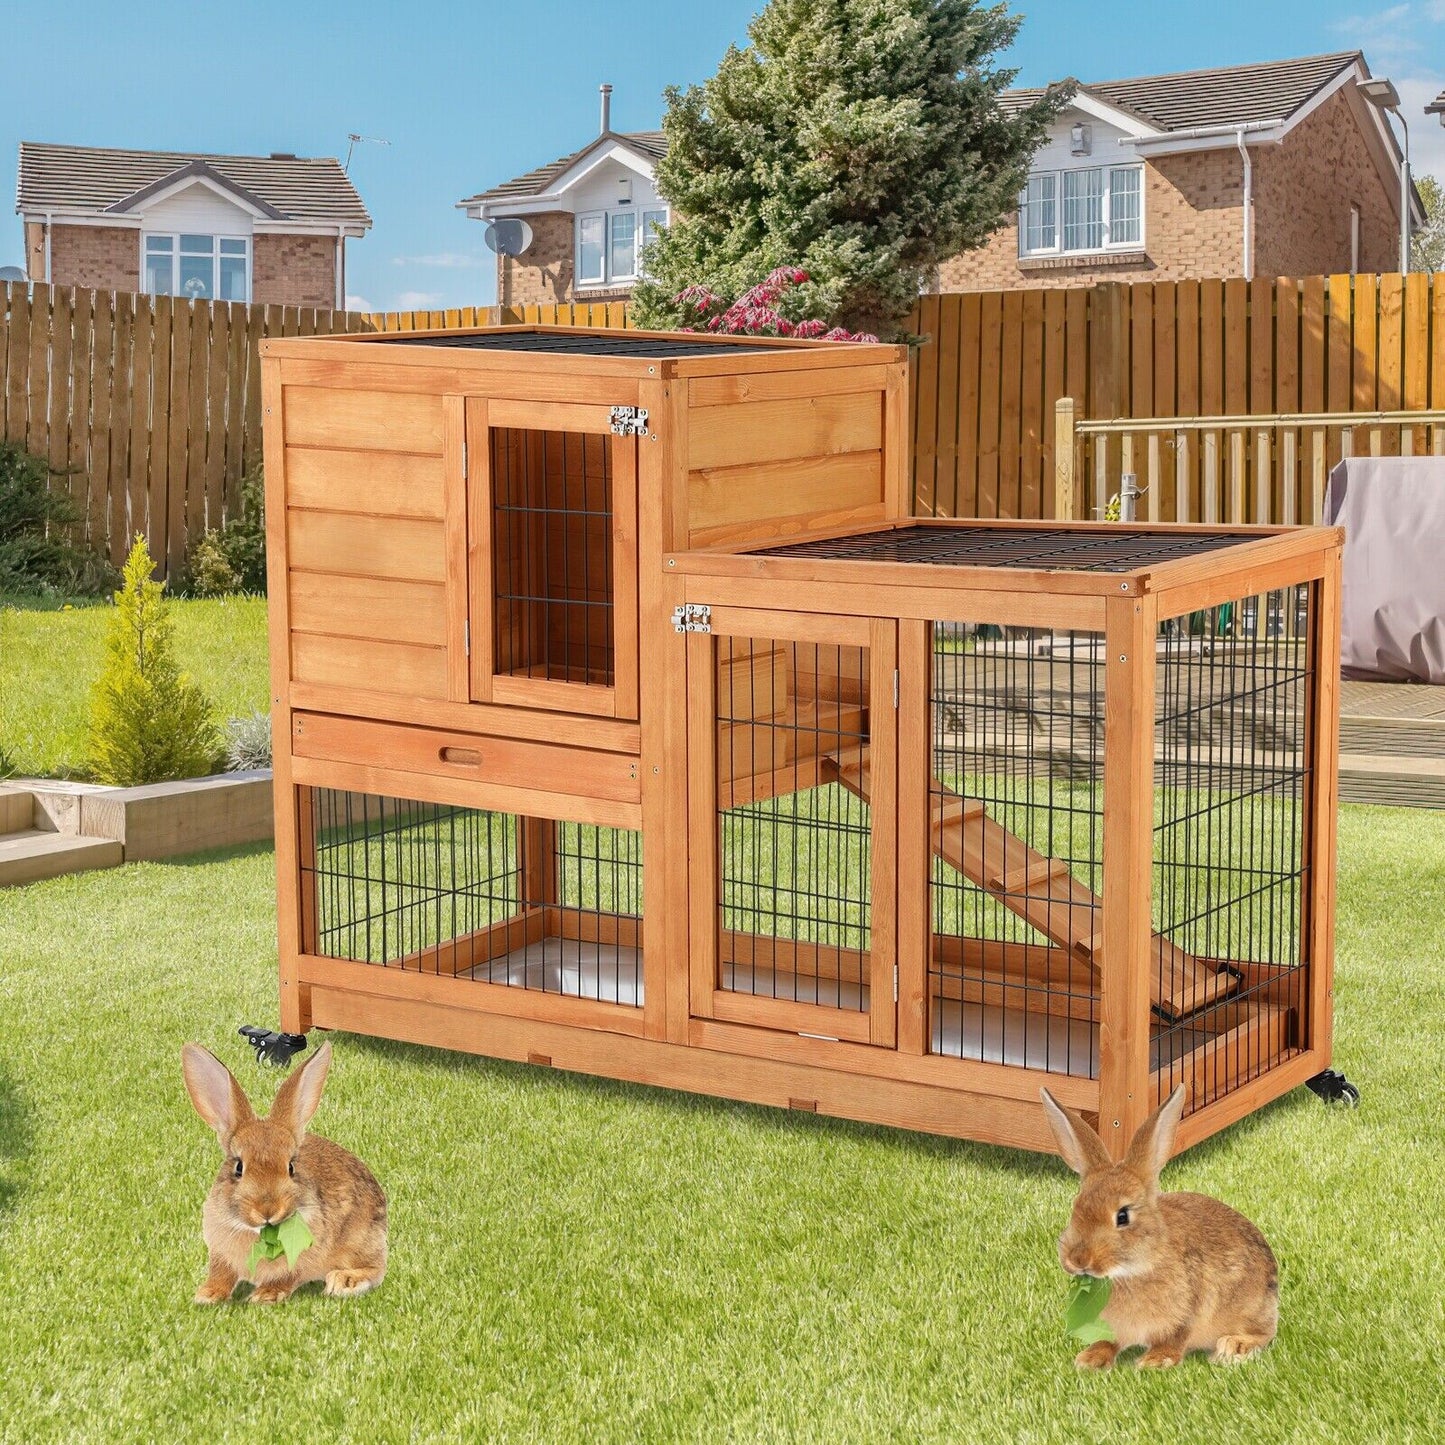 Arlopu 43.3'' Wooden Rabbit Hutch, Elevated Rabbit Cage On Brake Wheel, Large Rolling Bunny Hutch, with 2 Deeper No Leak Tray, Ramp, for Small Animals